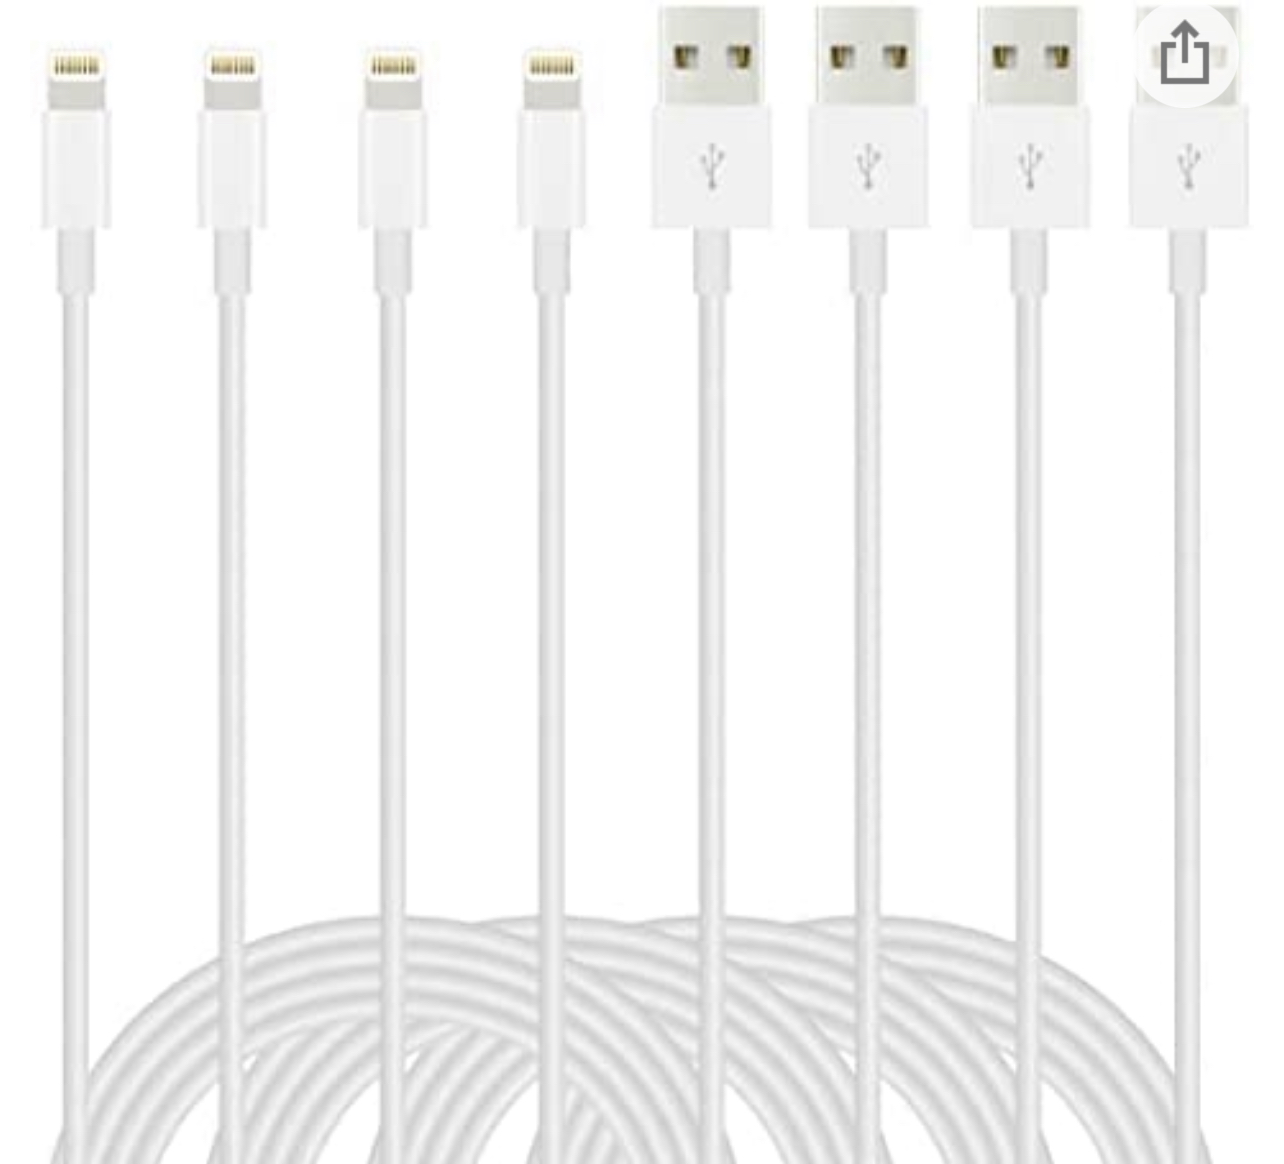 On sale 80 % off lightening charging cables 